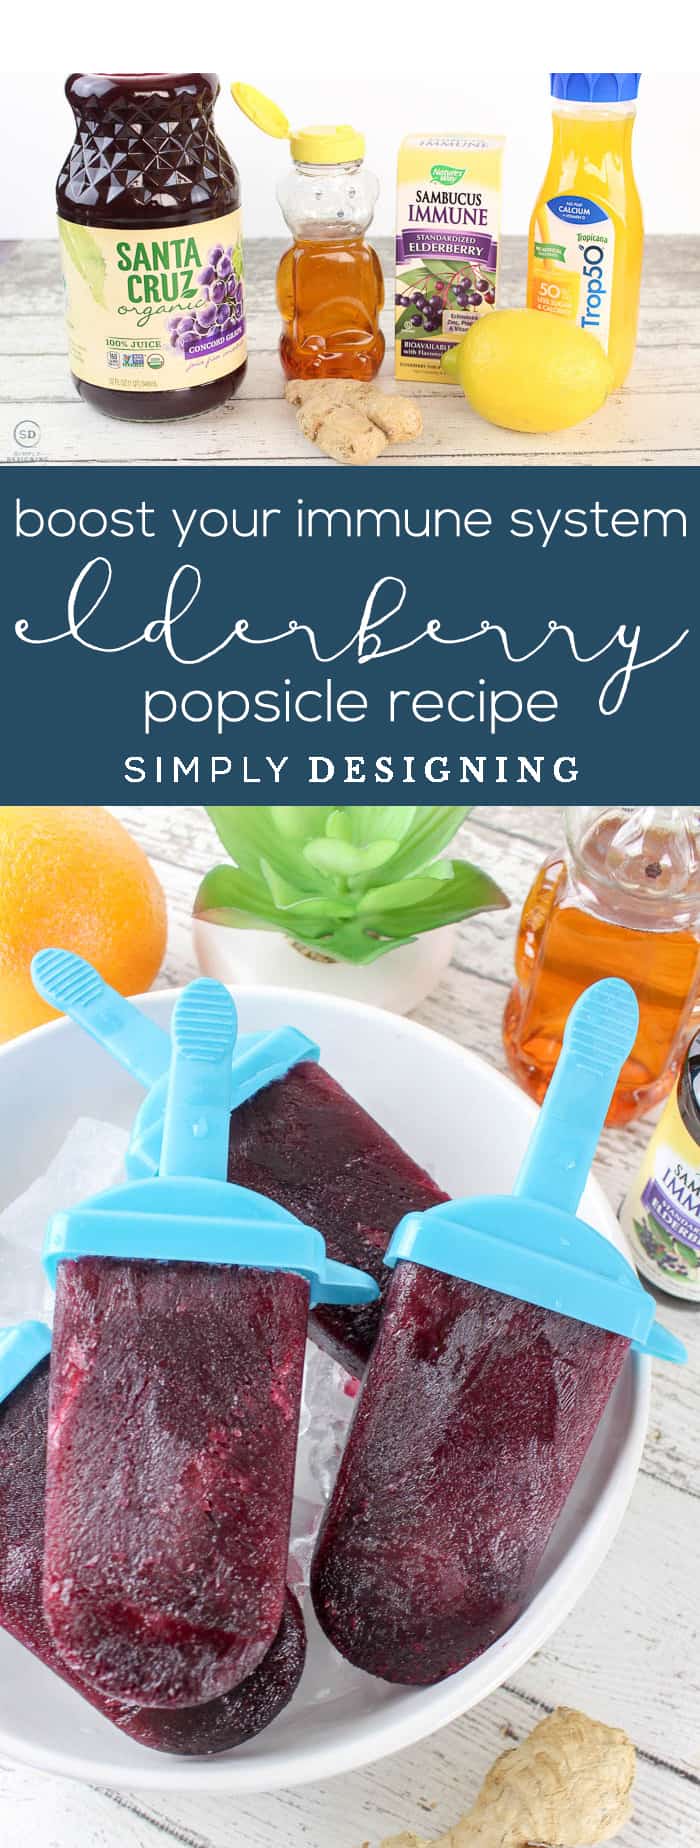 How to Boost Your Immune System with Elderberry Popsicles - a yummy elderberry popsicle recipe